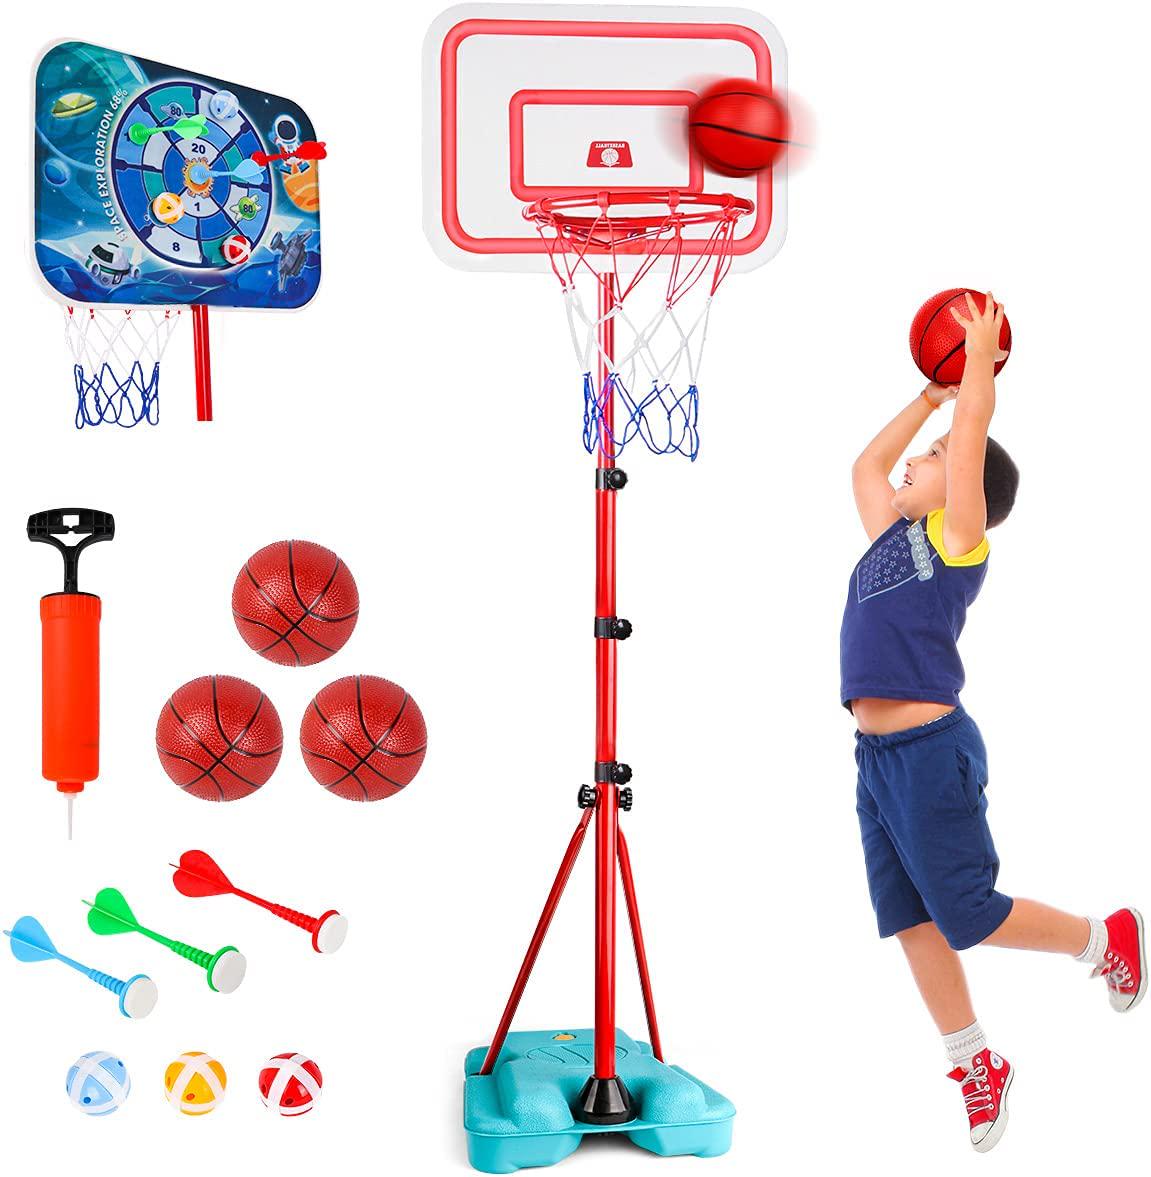 Meland, Kids Basketball Hoop and Stand - Portable Basketball Stand Set with 3 Balls 34.7-74.8 inch Adjustable Outdoor and Indoor Ball Games for Kids Toddlers Boys